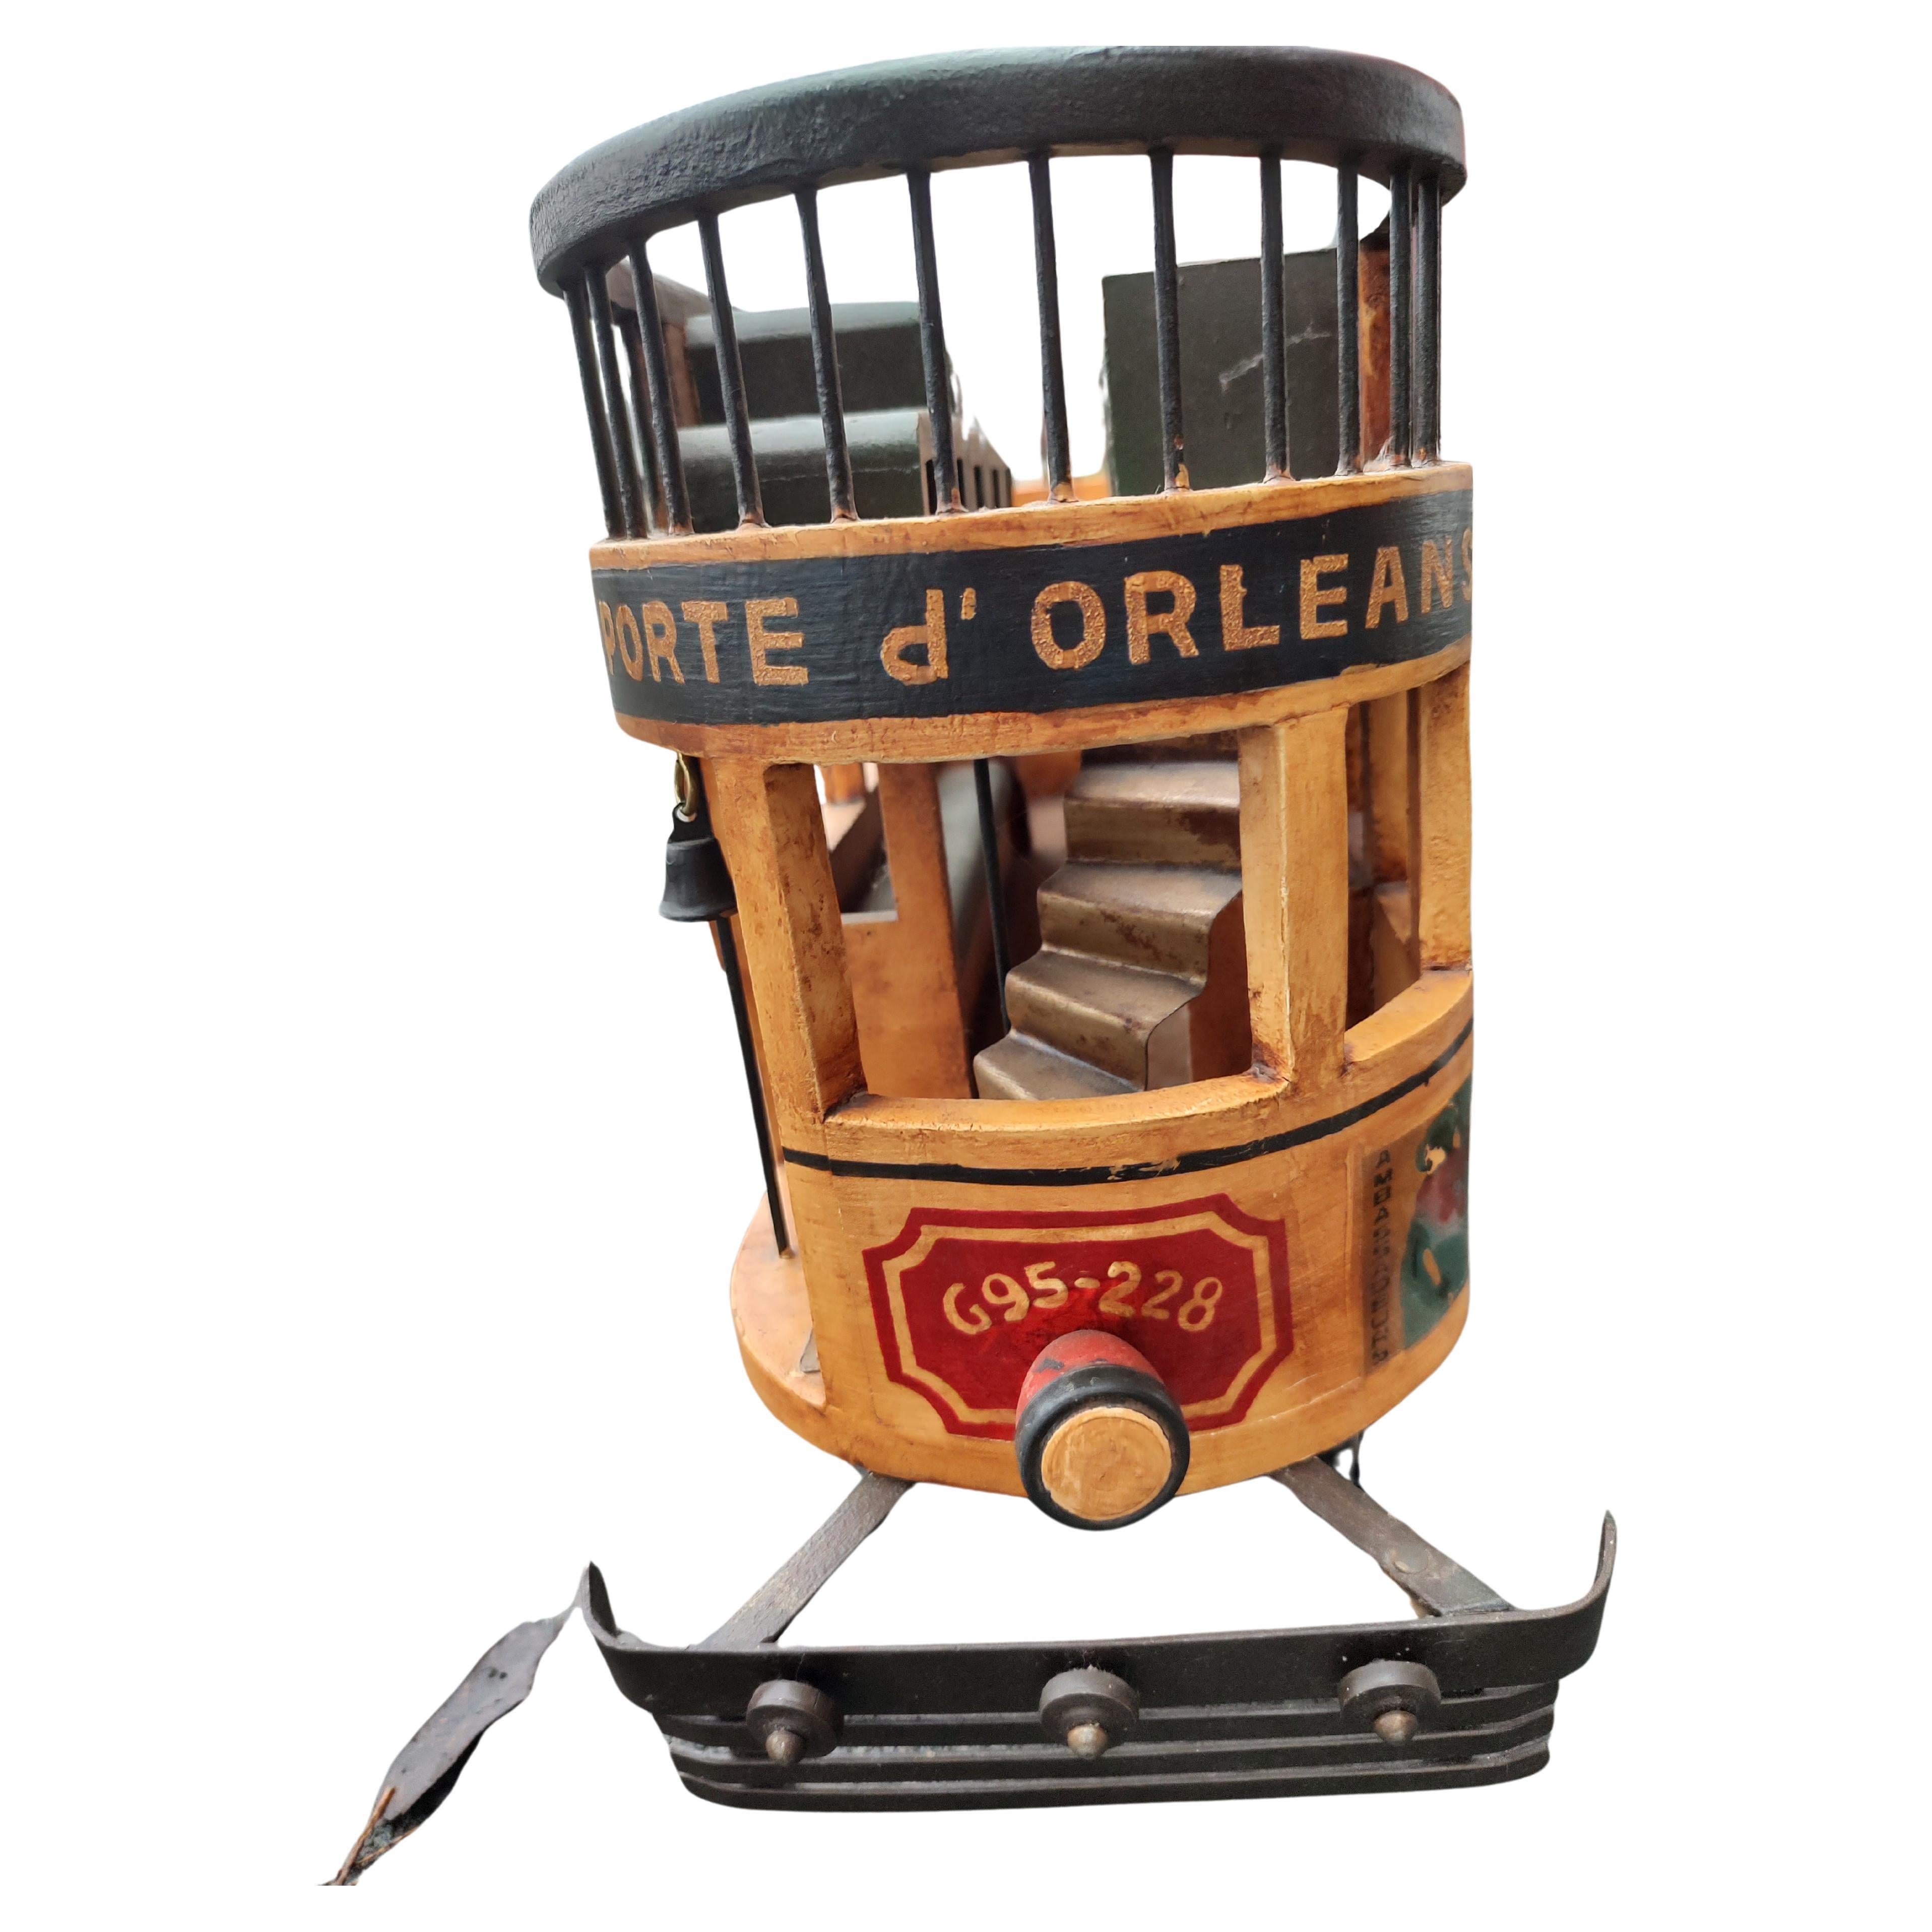 Fabulous hand painted double decker trolley car with cast iron wheels that work. In excellent vintage condition with minimal wear.